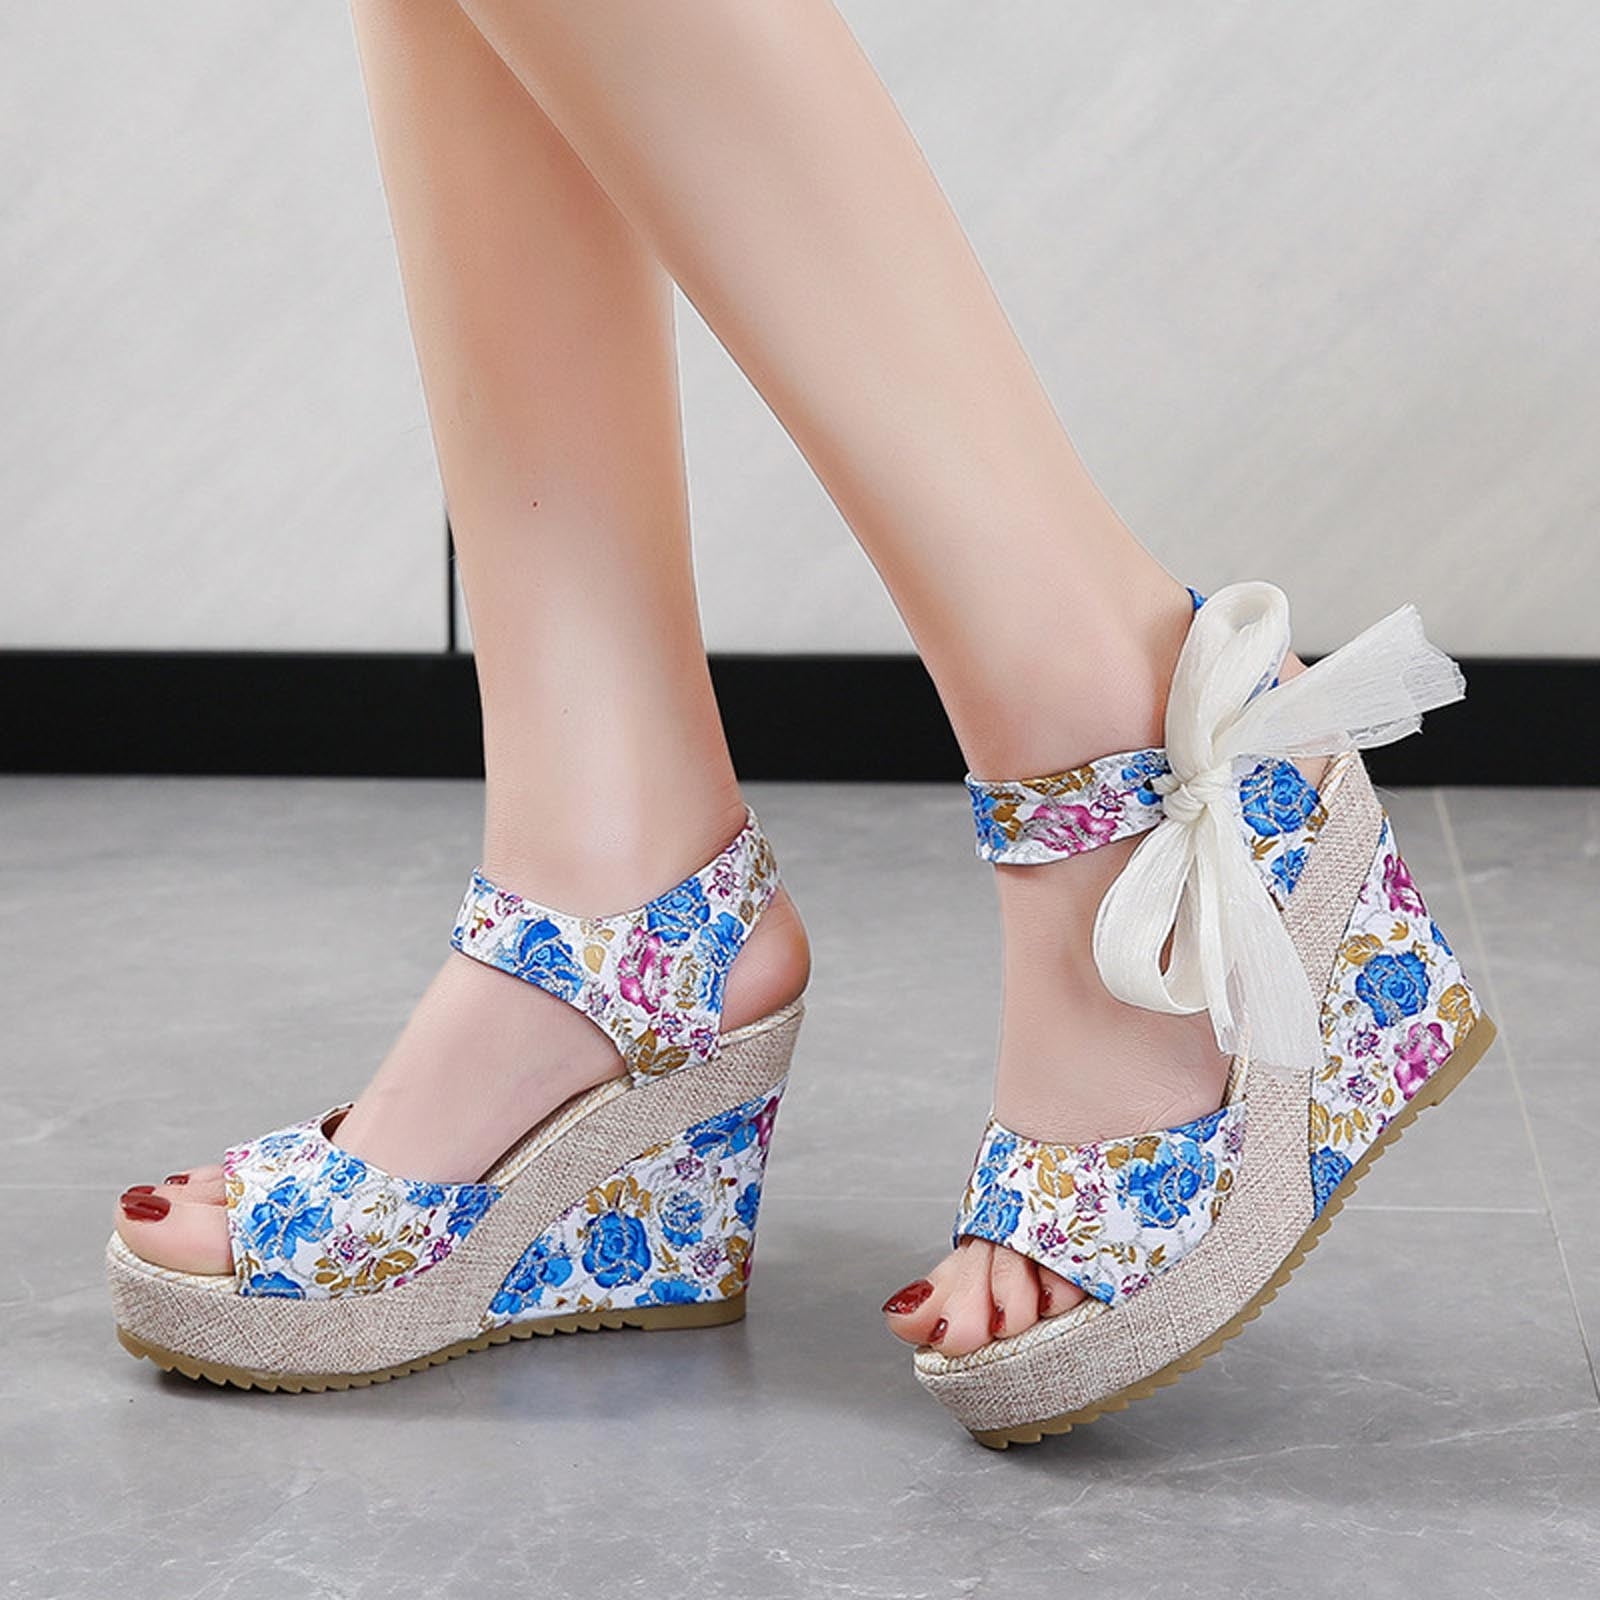 Best Wedge Sandals For Summer | Wedge sandals, Wedges, Fashion trend  articles